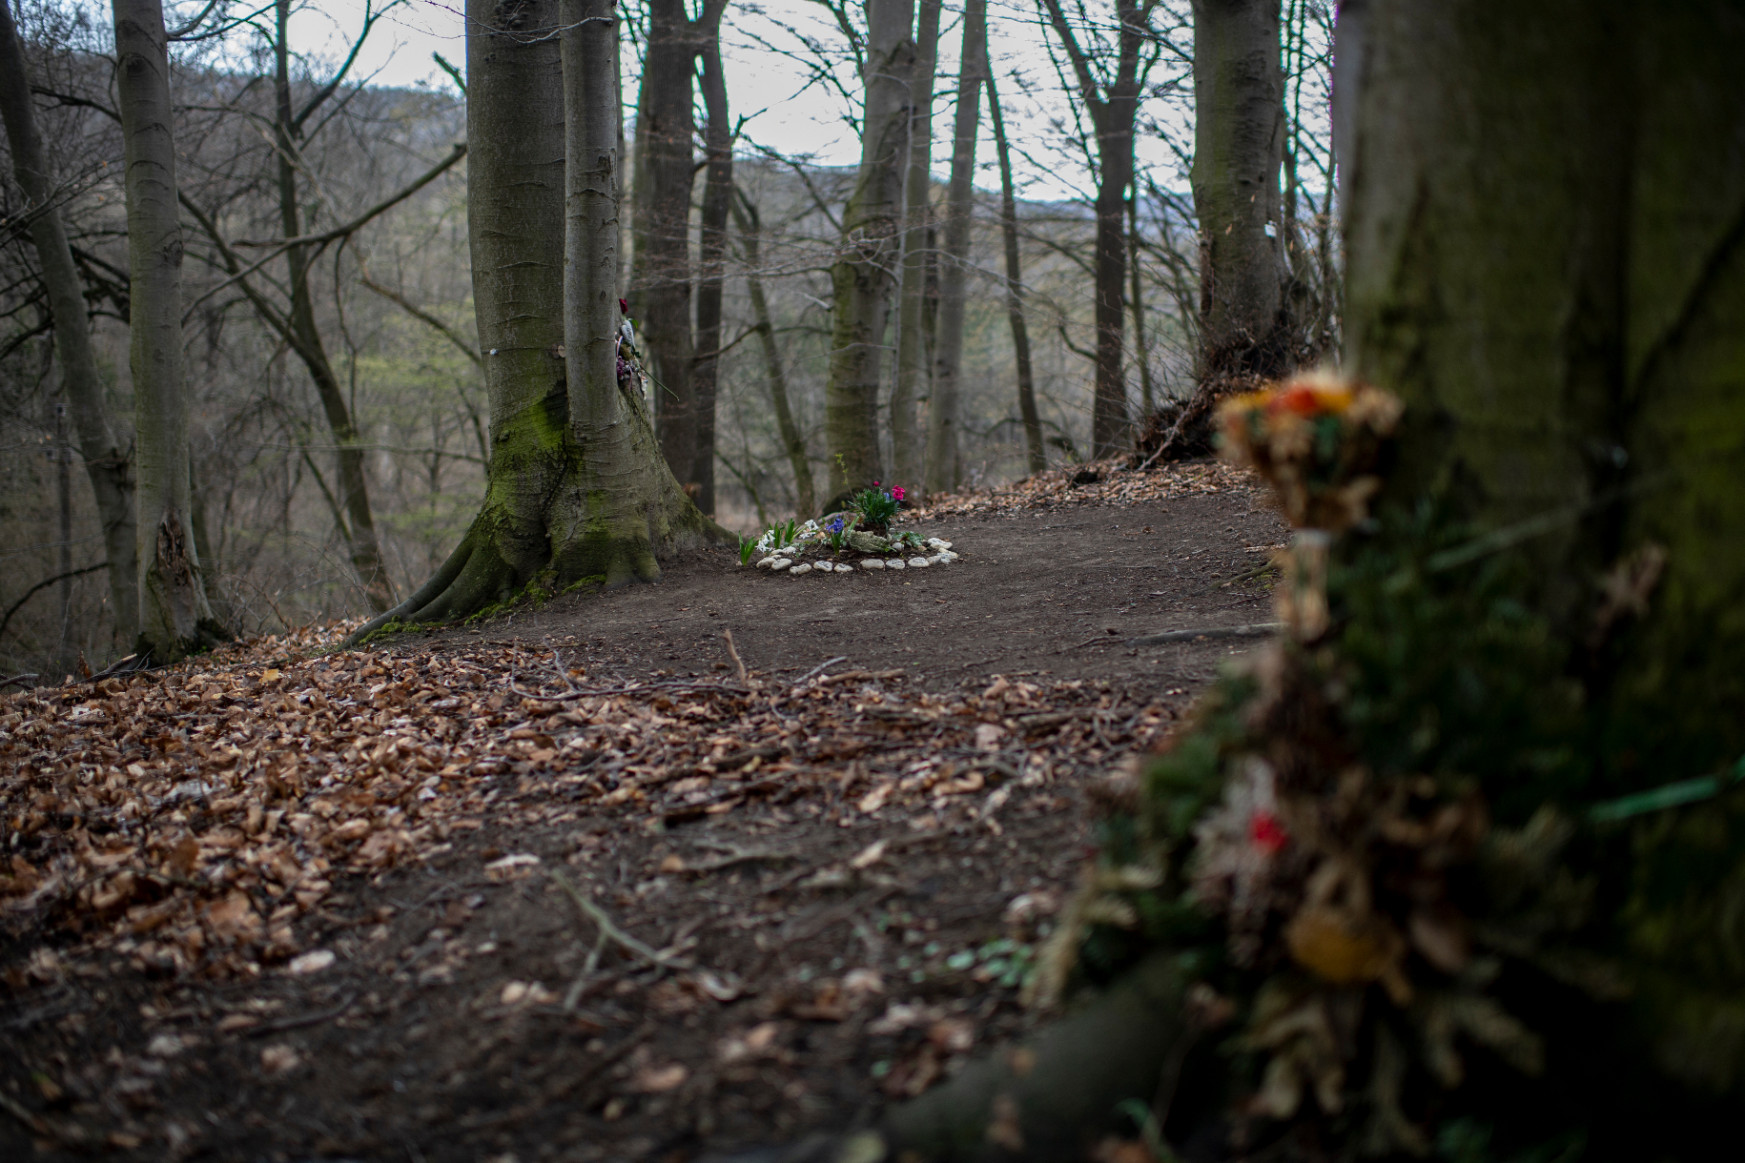 Hungary’s first memorial woodland — will Budapest have one soon?